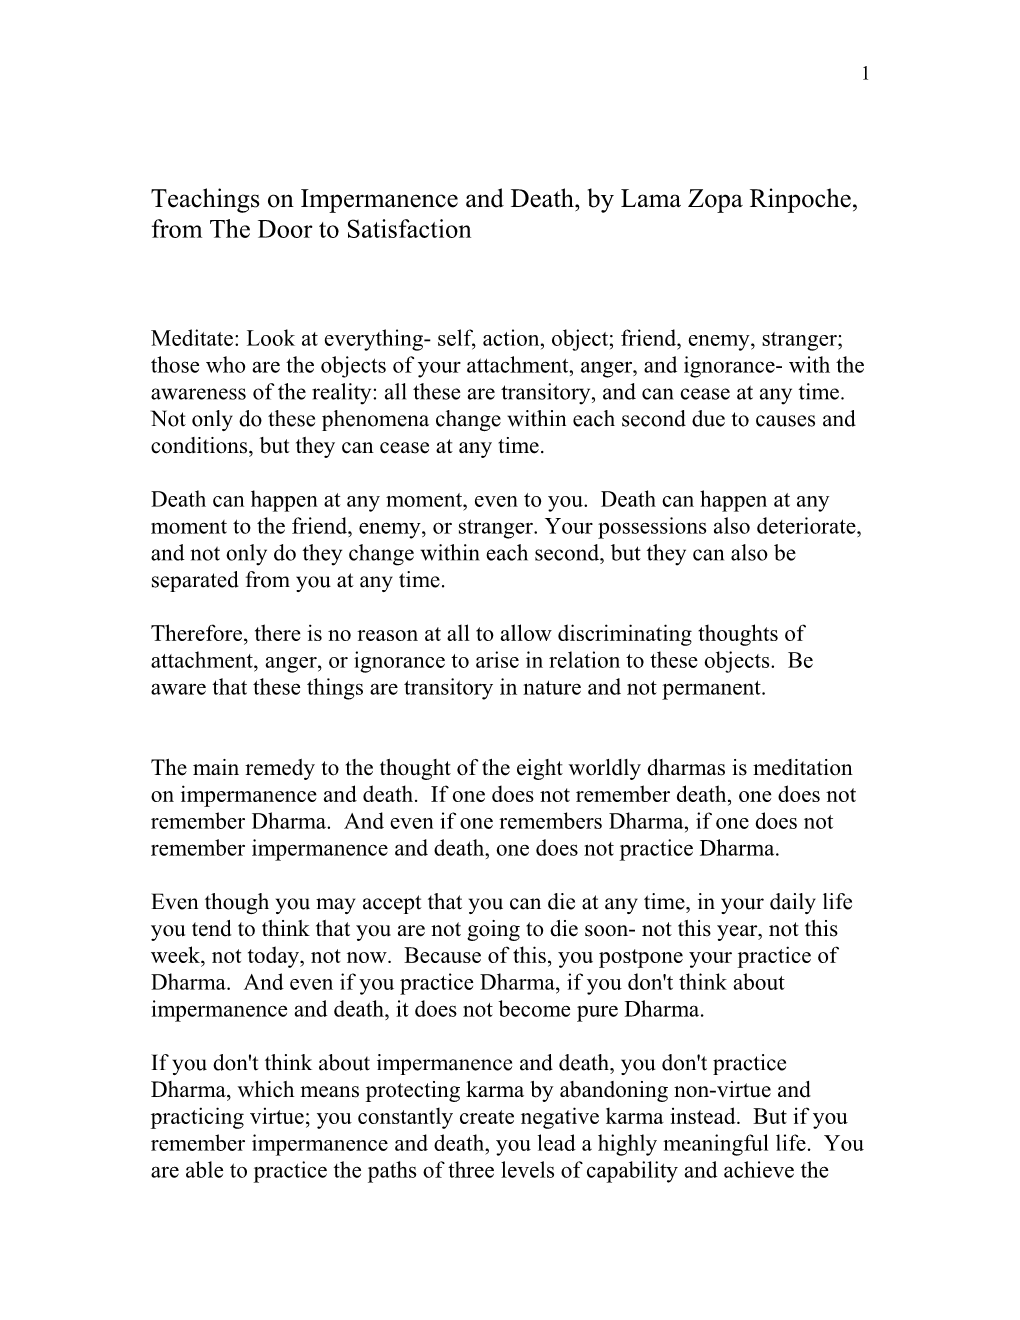 Teachings on Impermanence and Death, by Lama Zopa Rinpoche